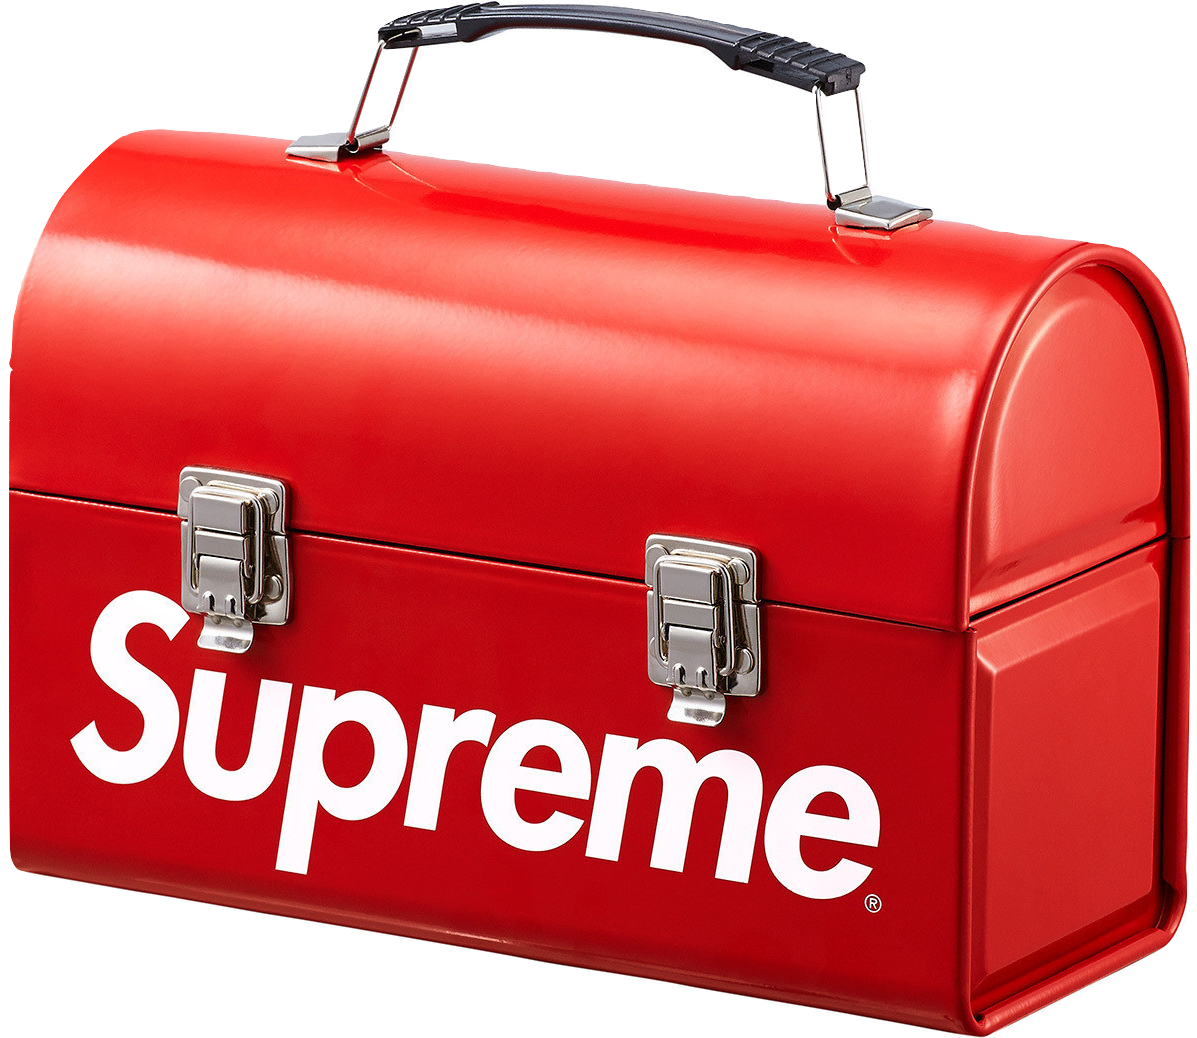 Supreme Metal Lunchbox - Red